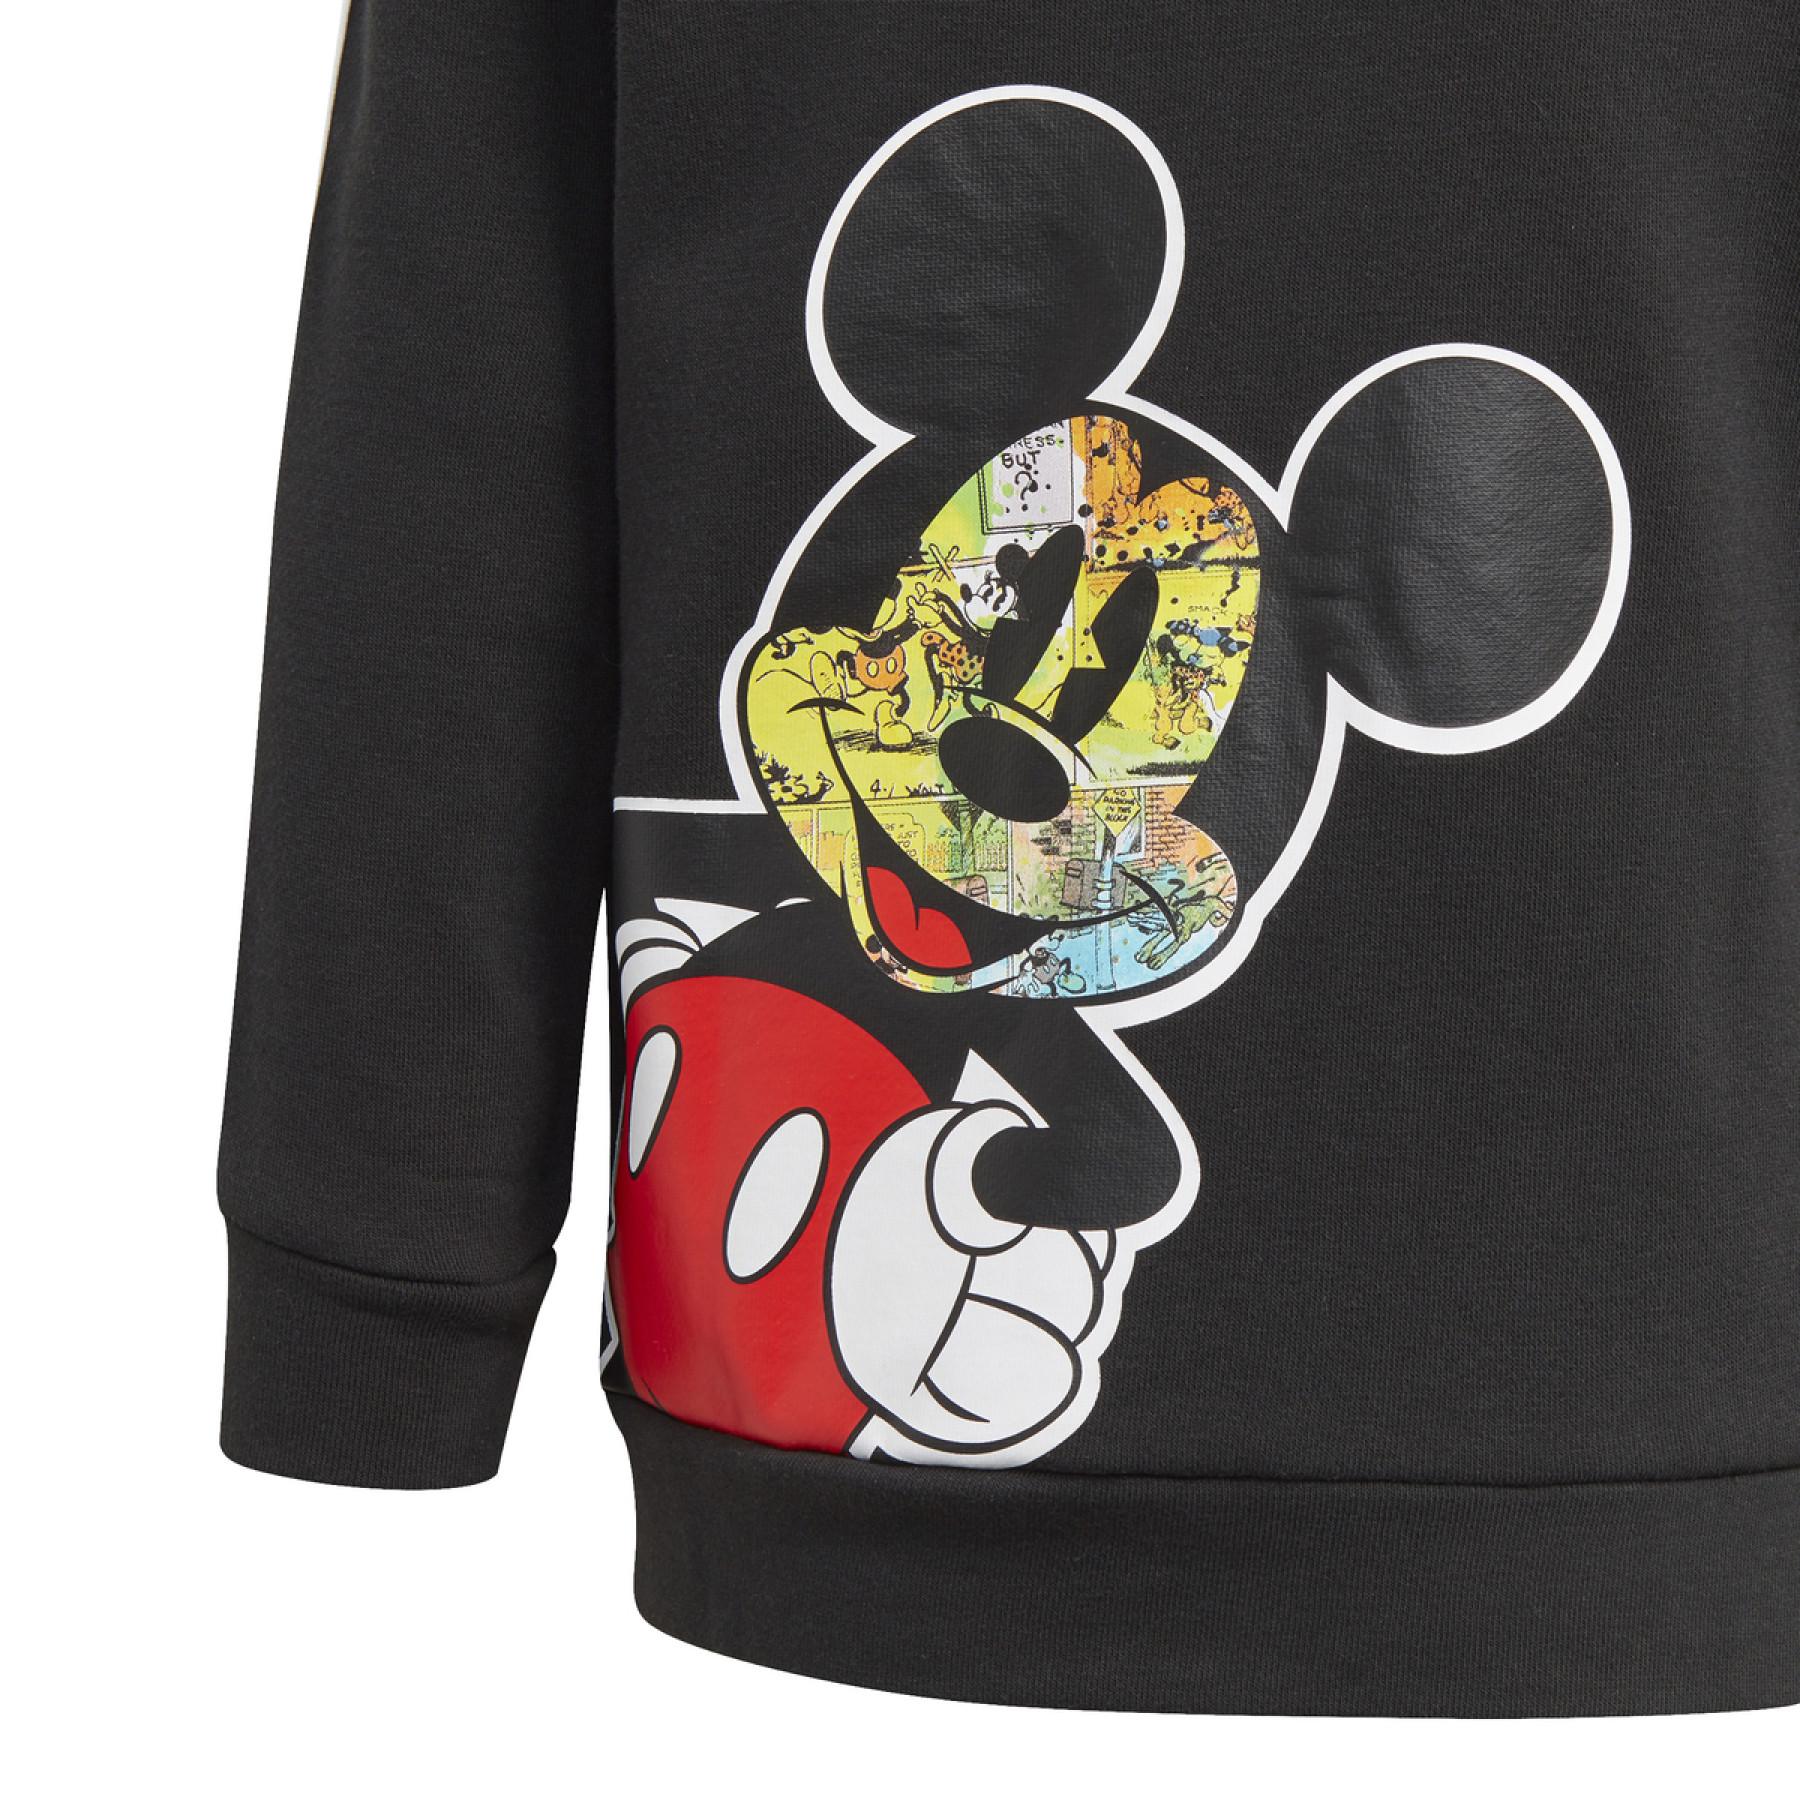 Children's jacket adidas Mickey Mouse Bomber